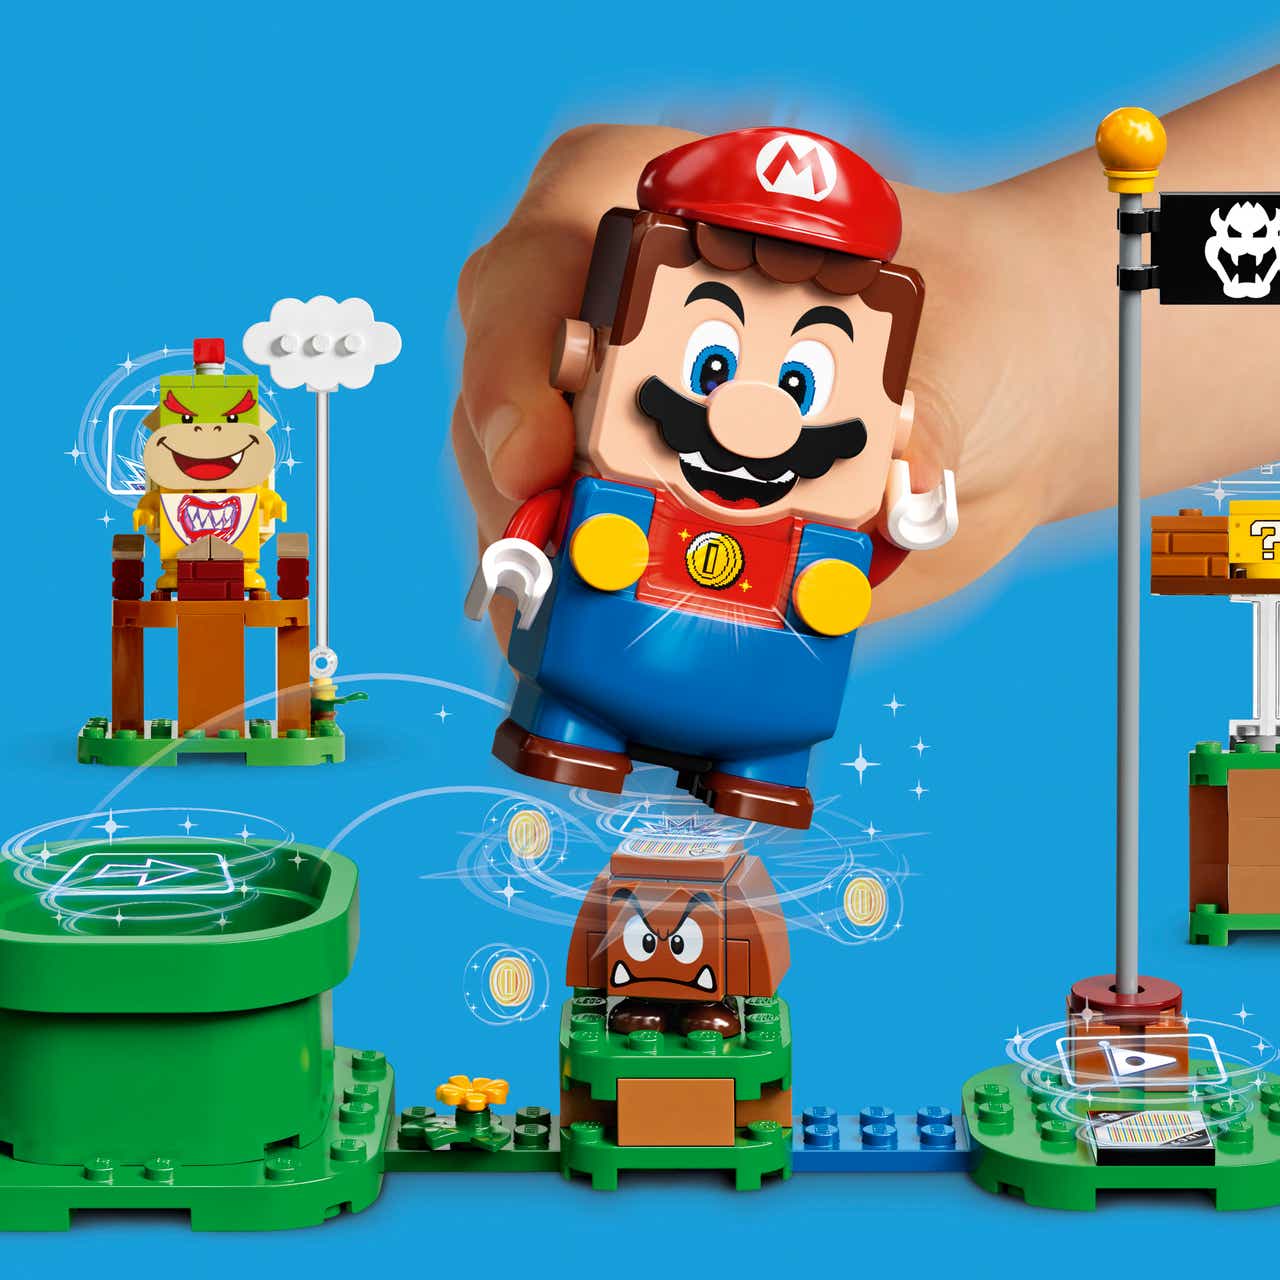 Lego Super Mario Expansion Sets the best addons for Lego